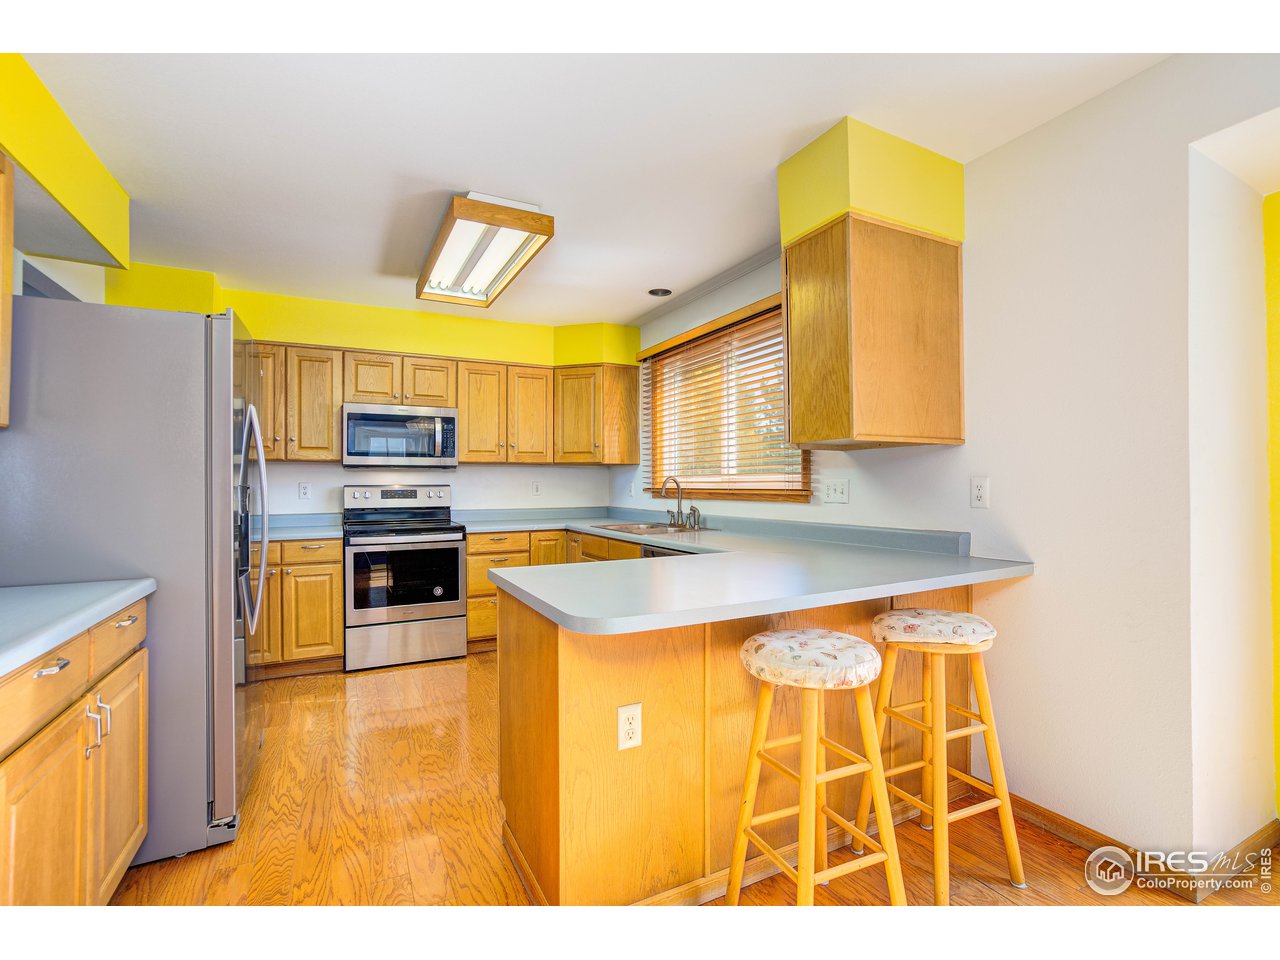 Large and bright kitchen with breakfast nook! 